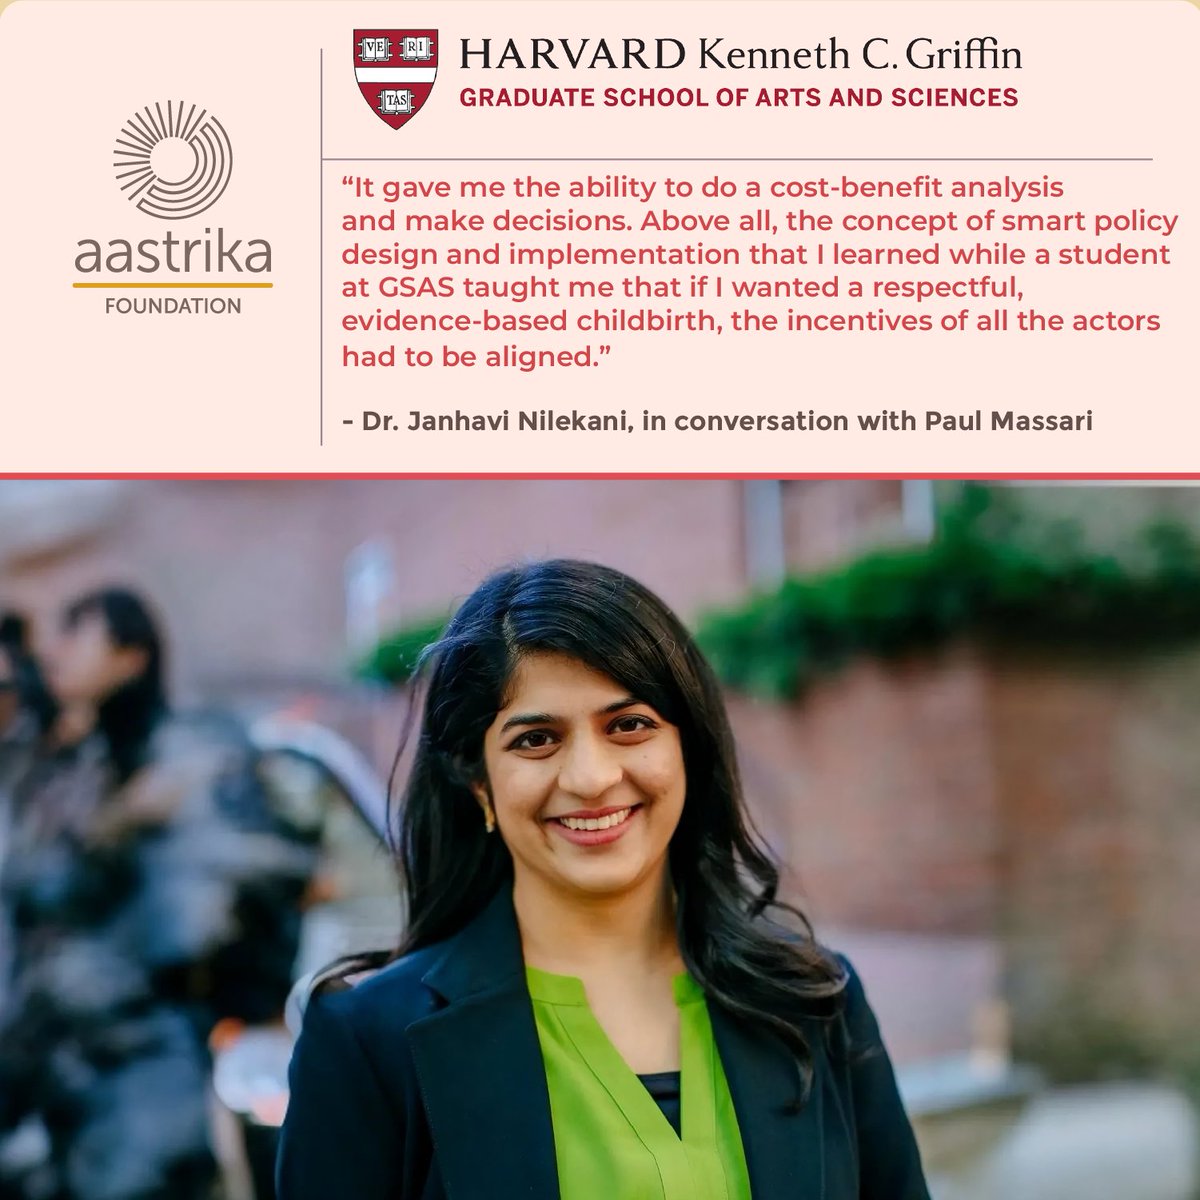 An incredible feature covered by the Harvard Kenneth C. Griffin Graduate School of Arts and Sciences @HarvardGSAS our Founder and Chairperson, Dr Janhavi Nilekani's @JanhaviNilekani journey and Aastrika's mission!